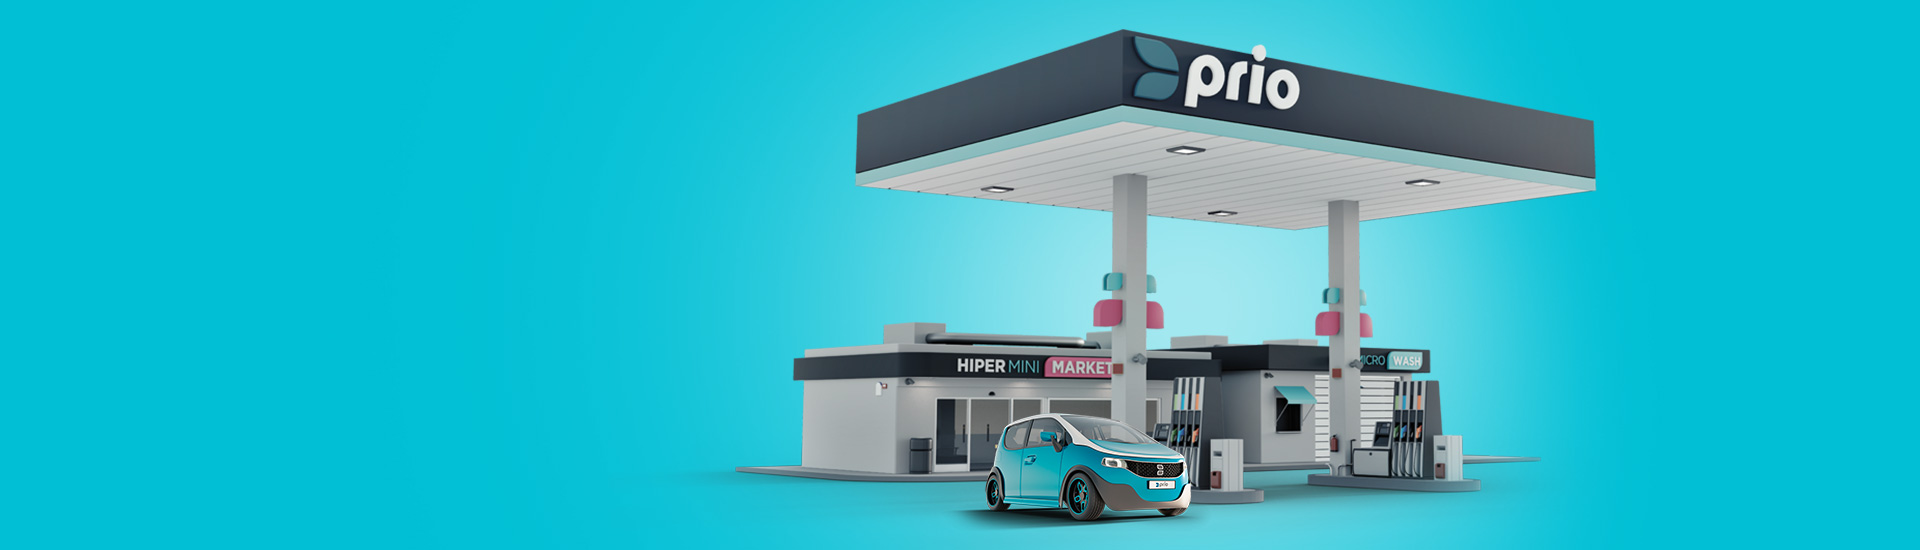 250 filling stations across the country